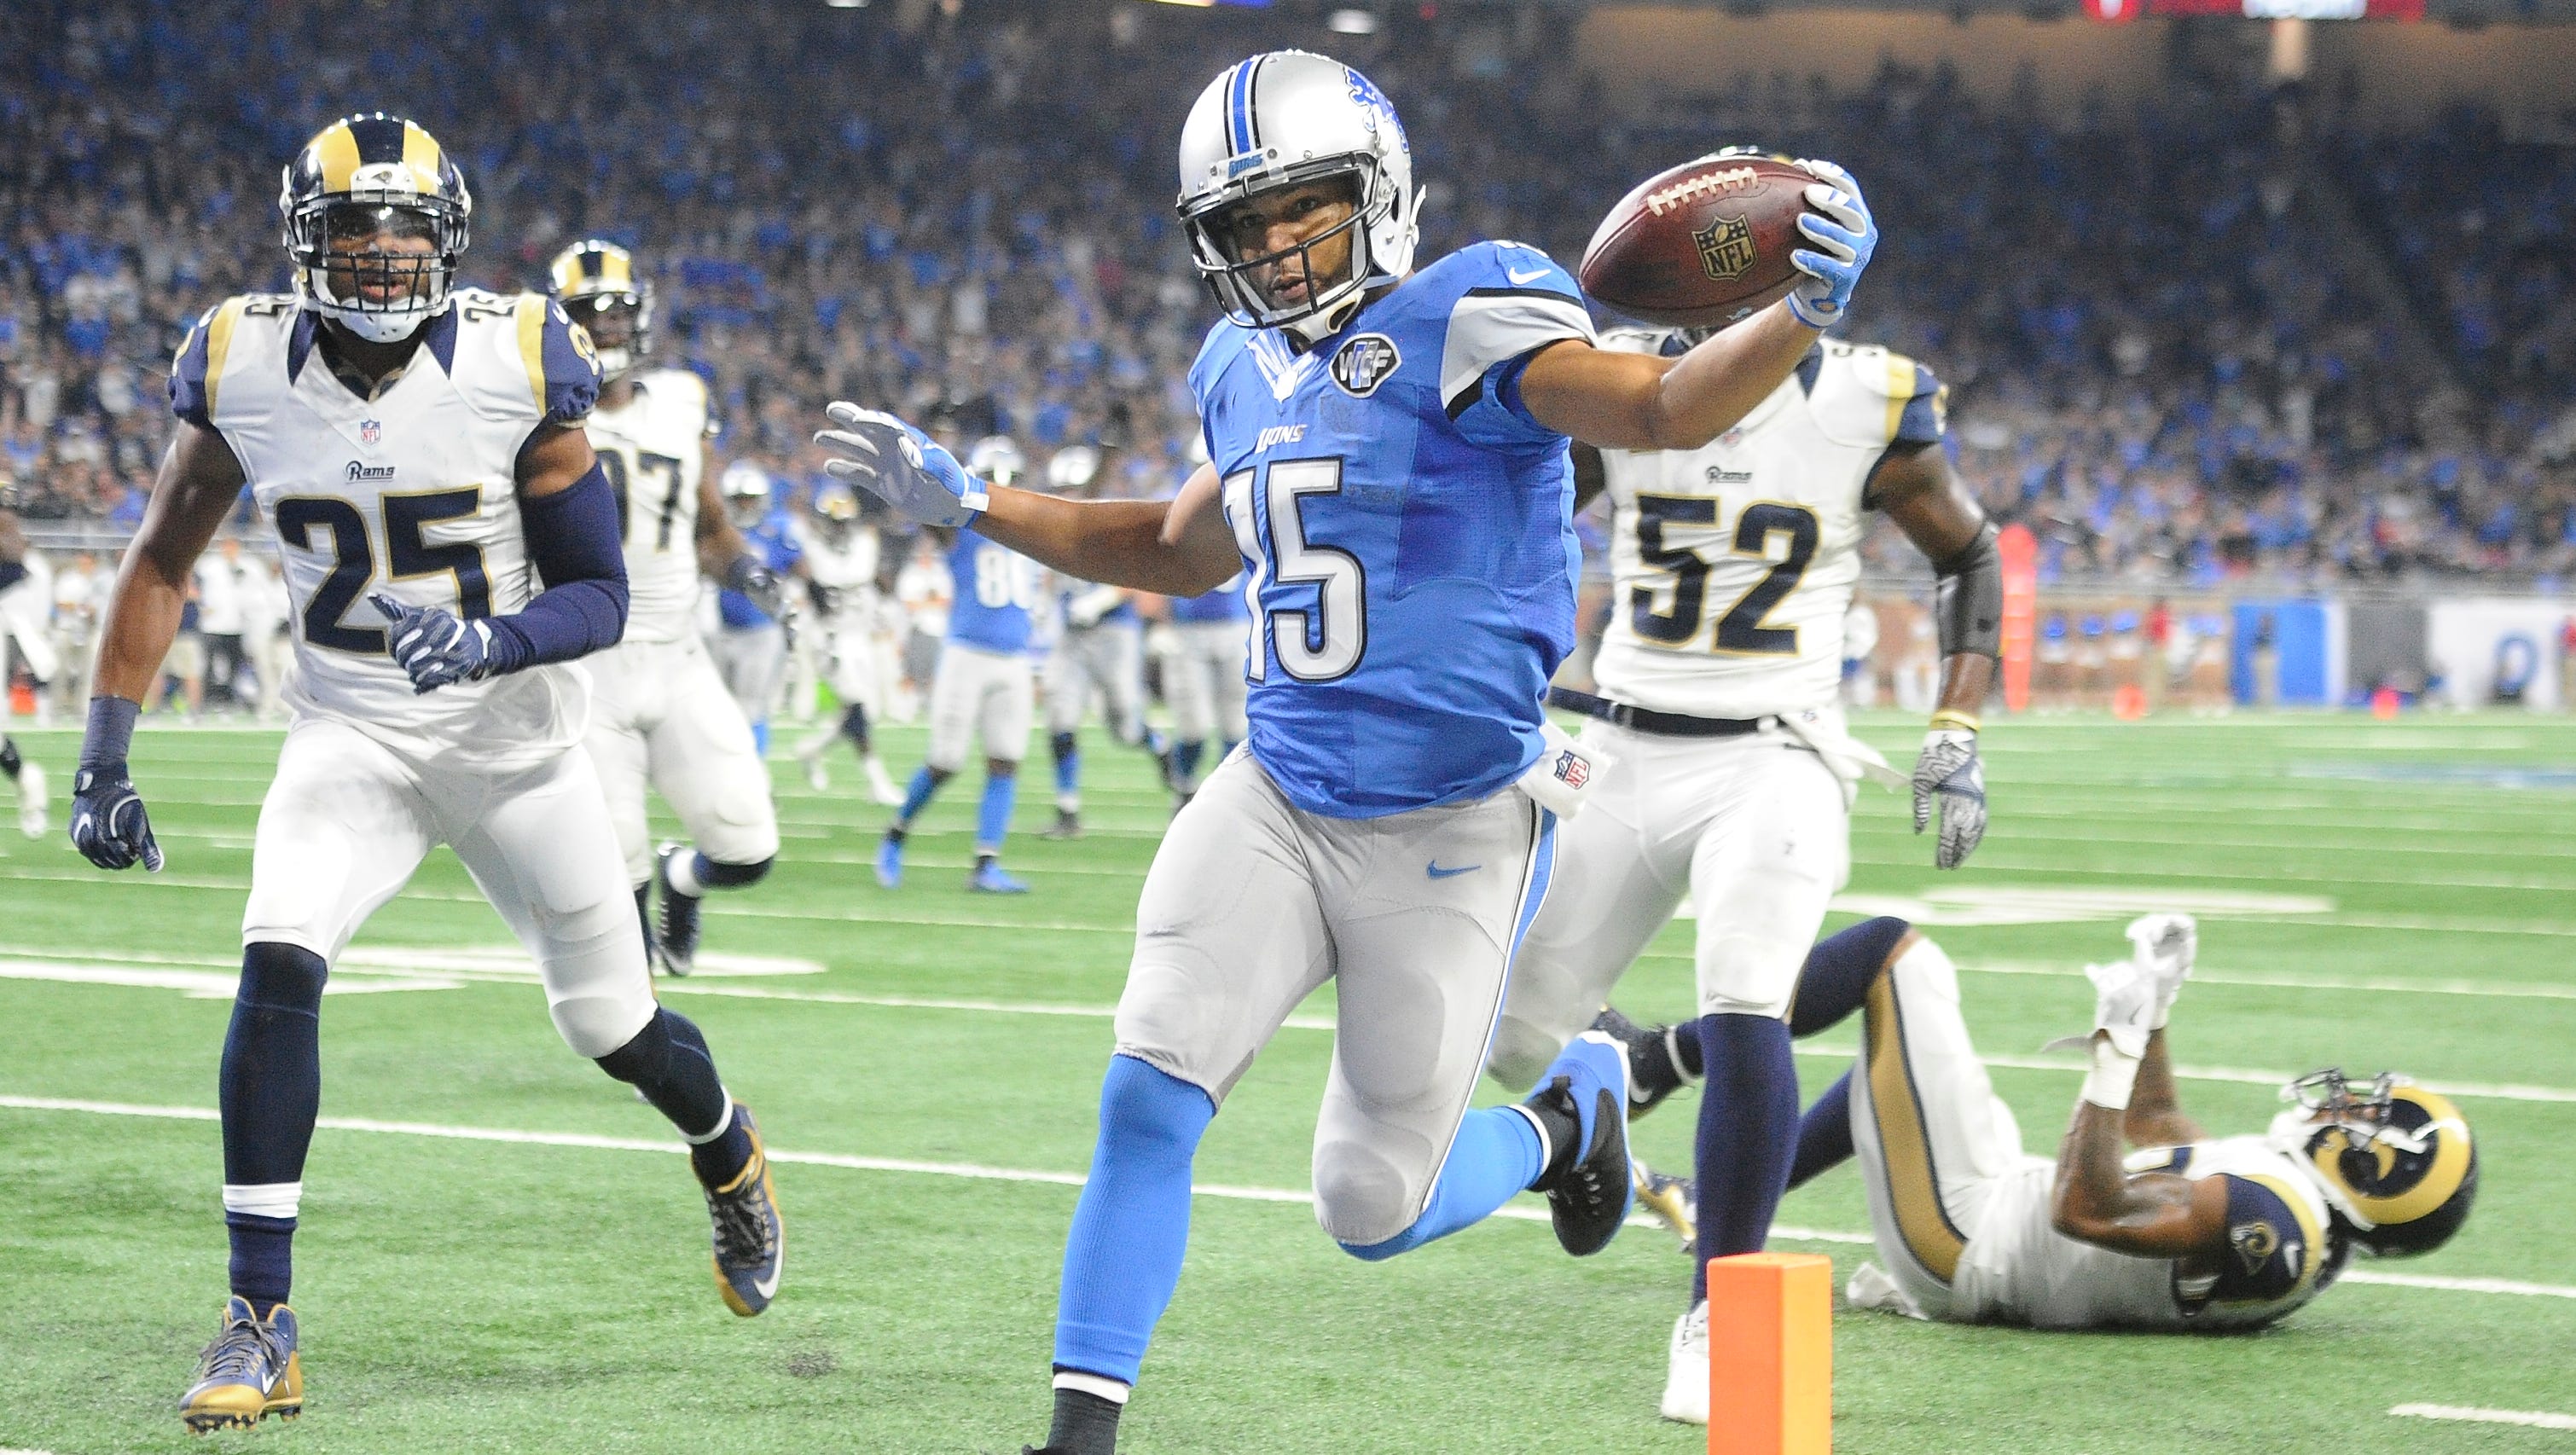 Lions wide receiver Golden Tate tip toes into the end zone to tie the game up at 28 late in the fourth quarter.